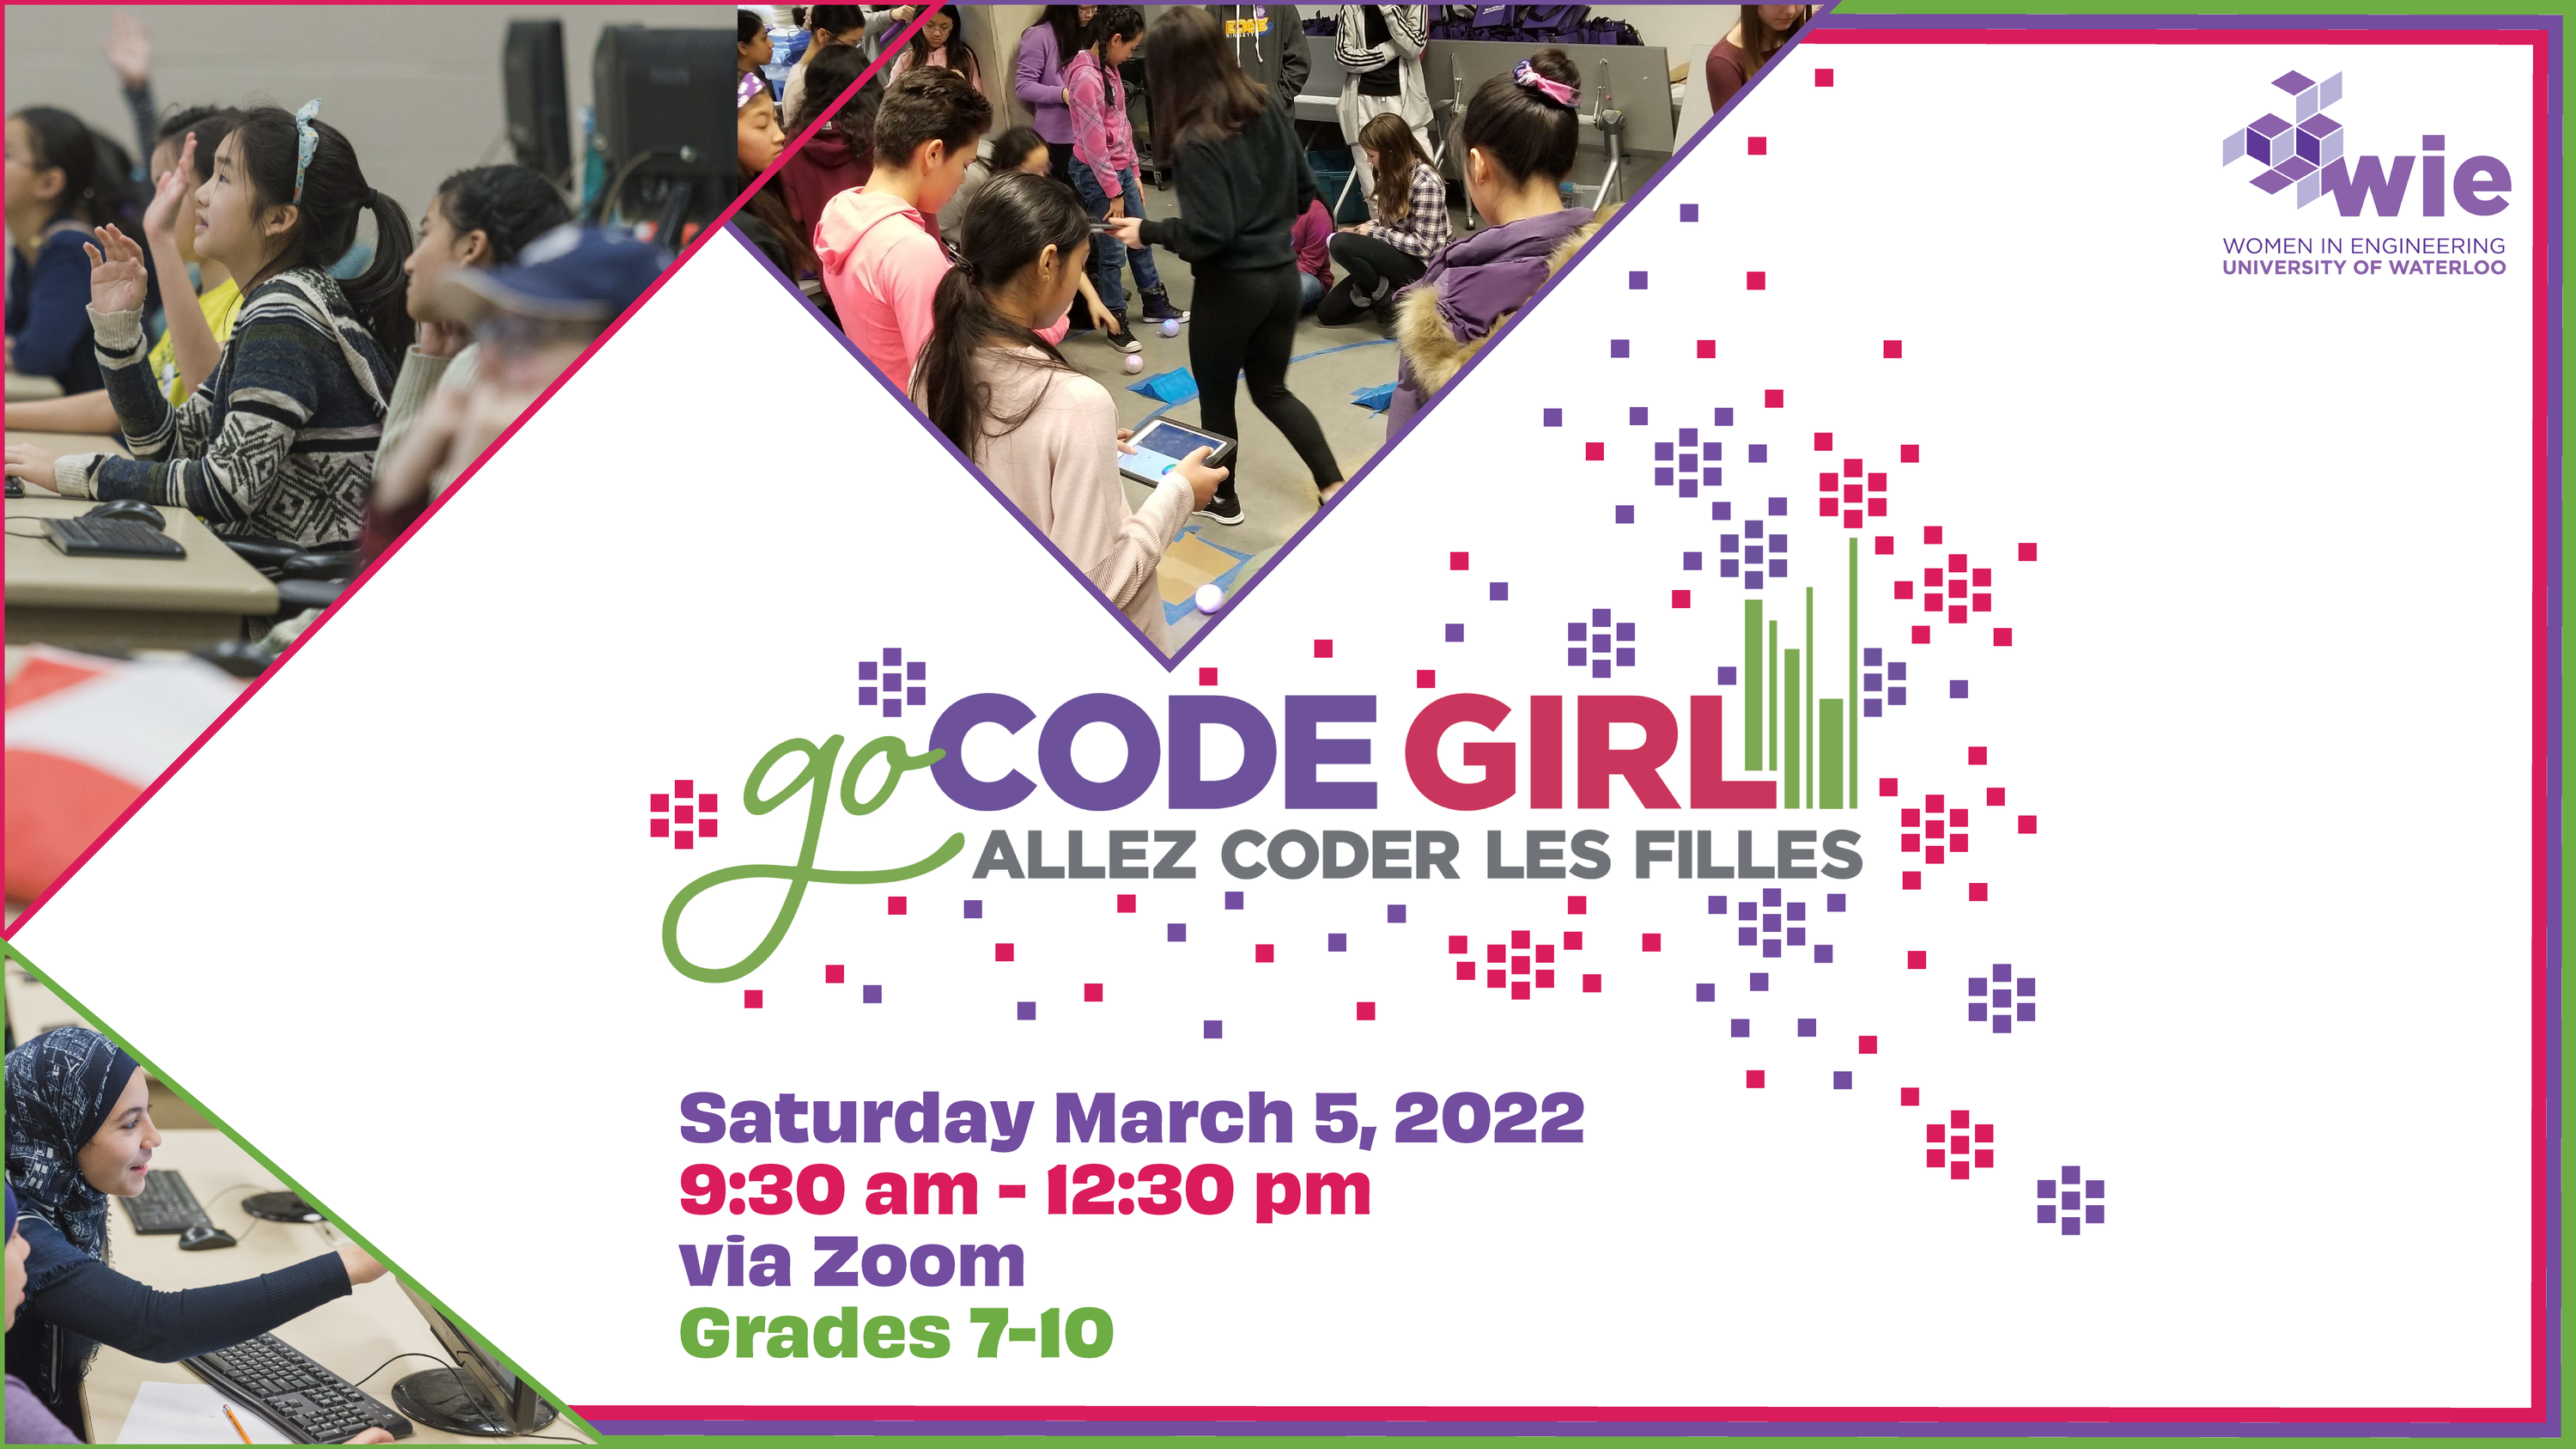 Poster mentioning Go CODE Girl Event happening on saturday, march 5th from 9:30 AM-12:30 PM Via zoom